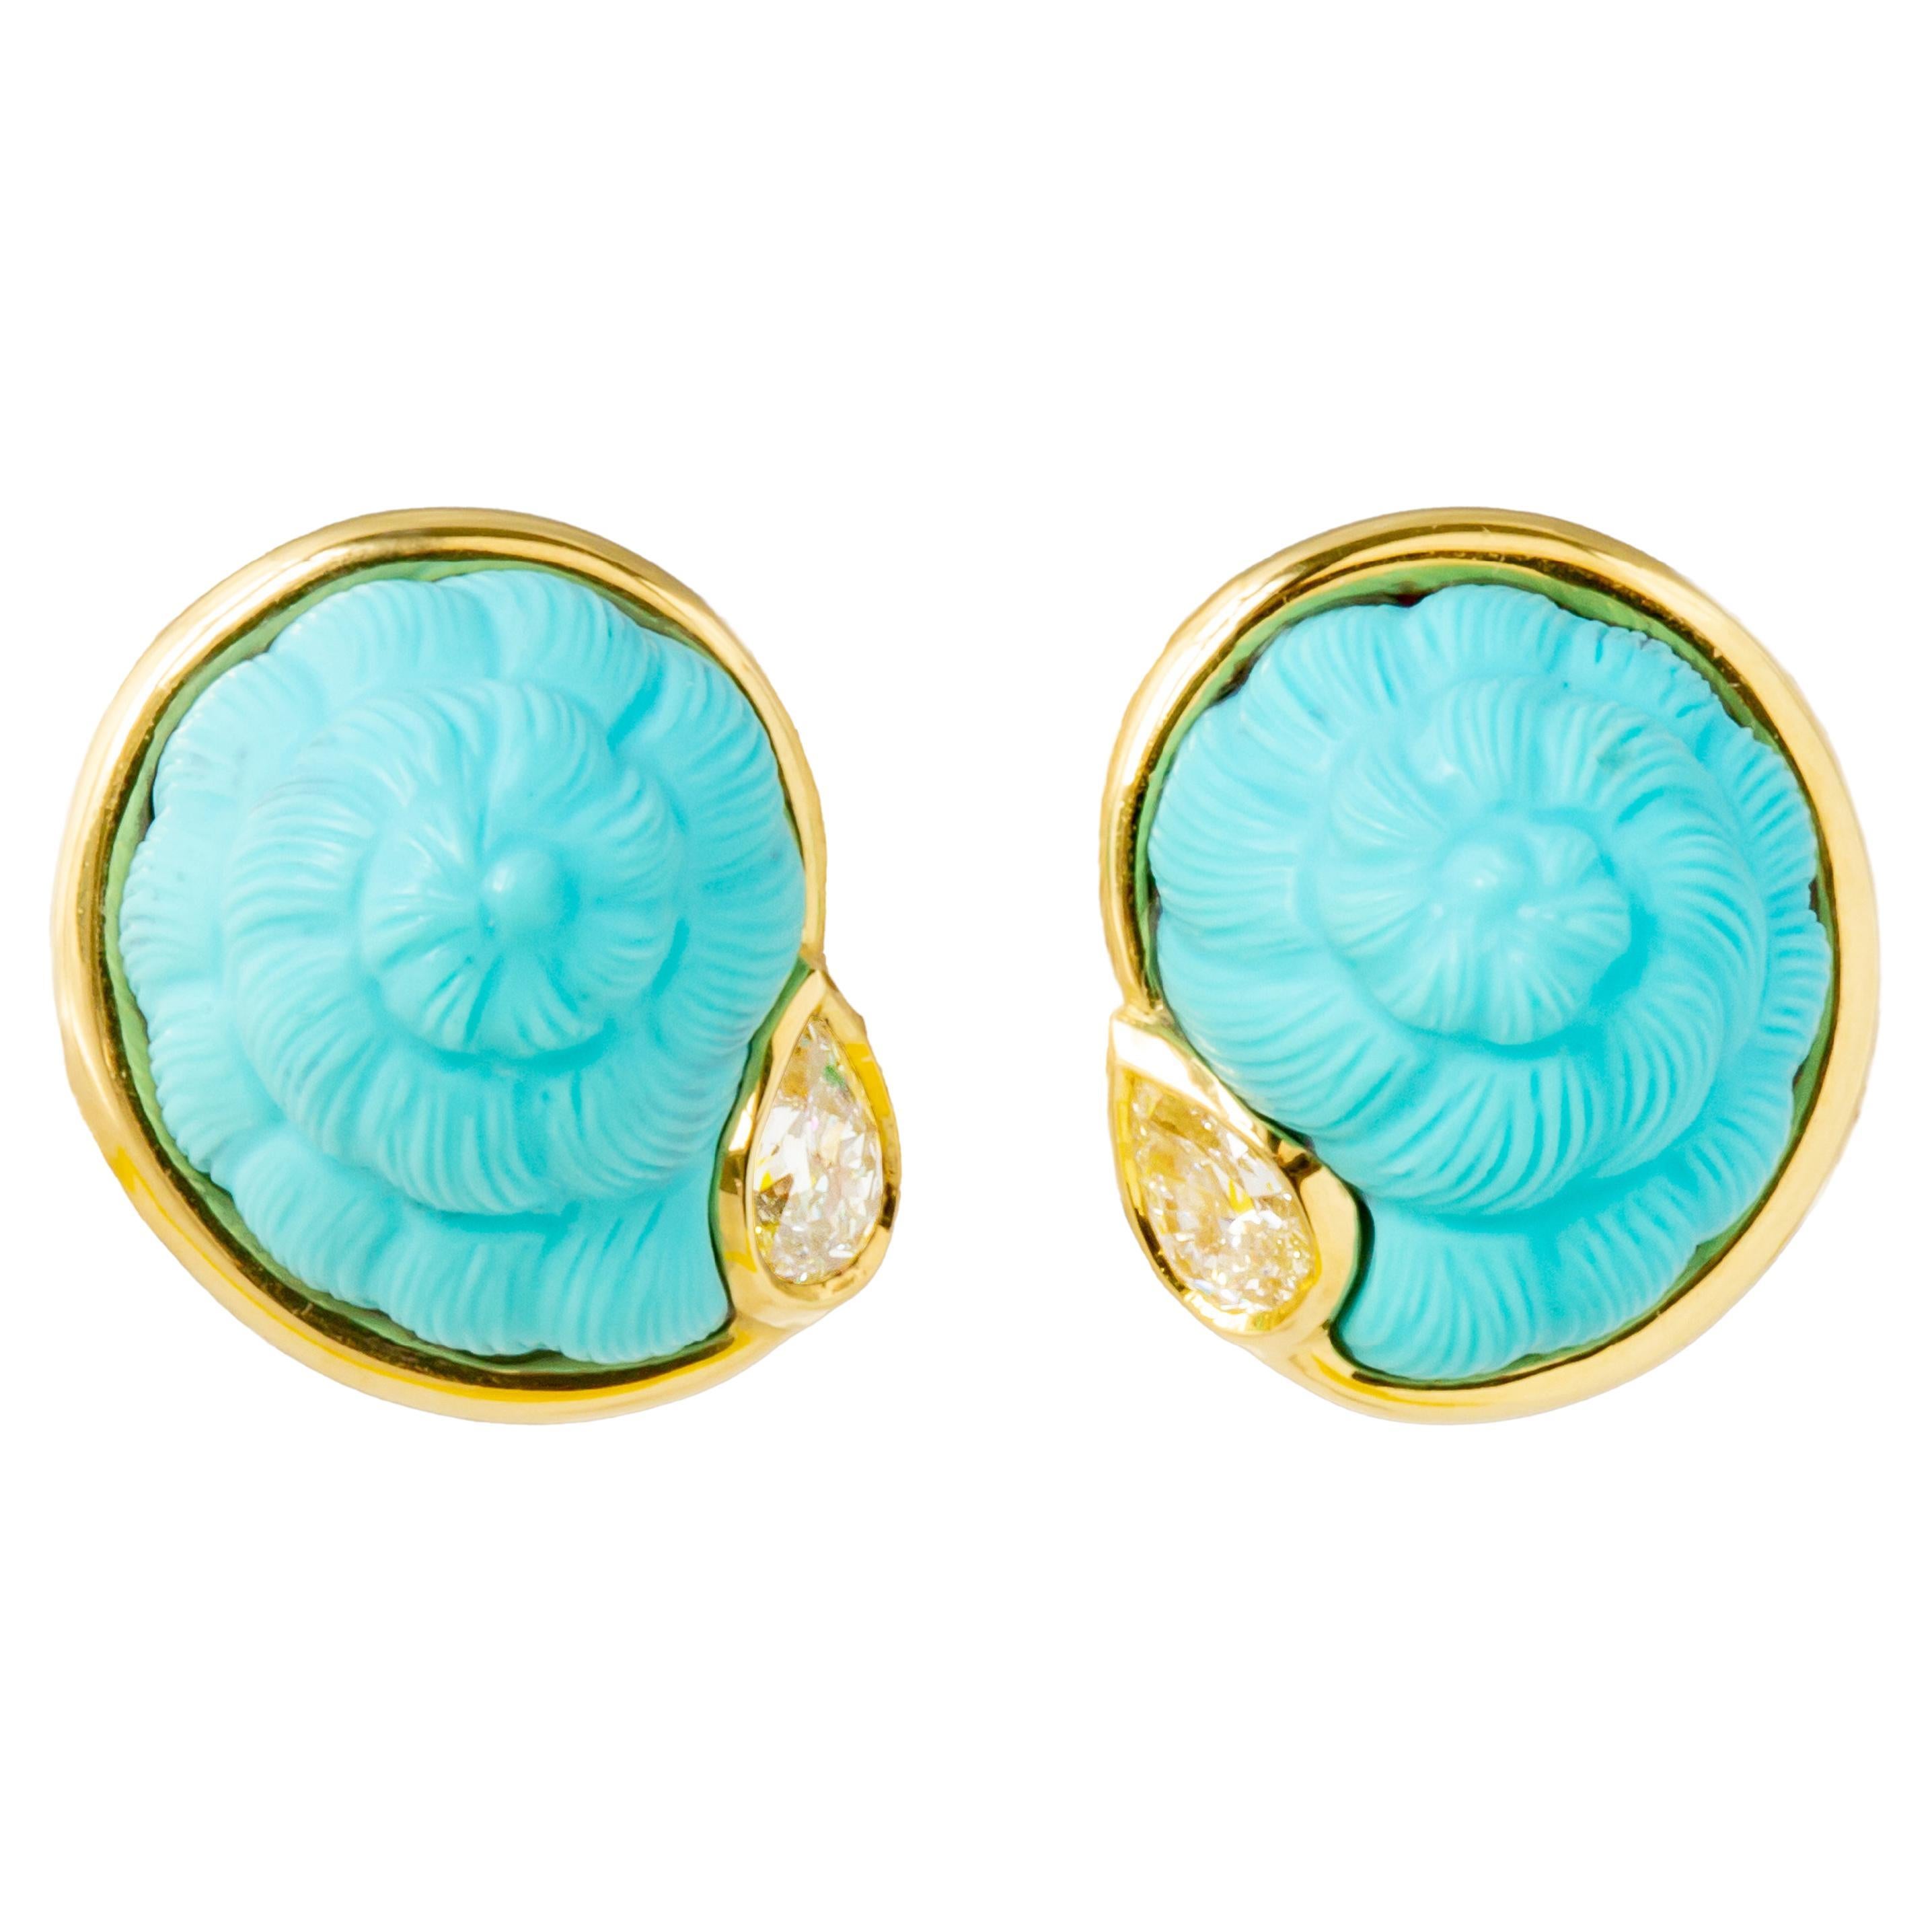 Susan Lister Locke Hand Carved Sleeping Beauty Turquoise Nautilus Earrings For Sale